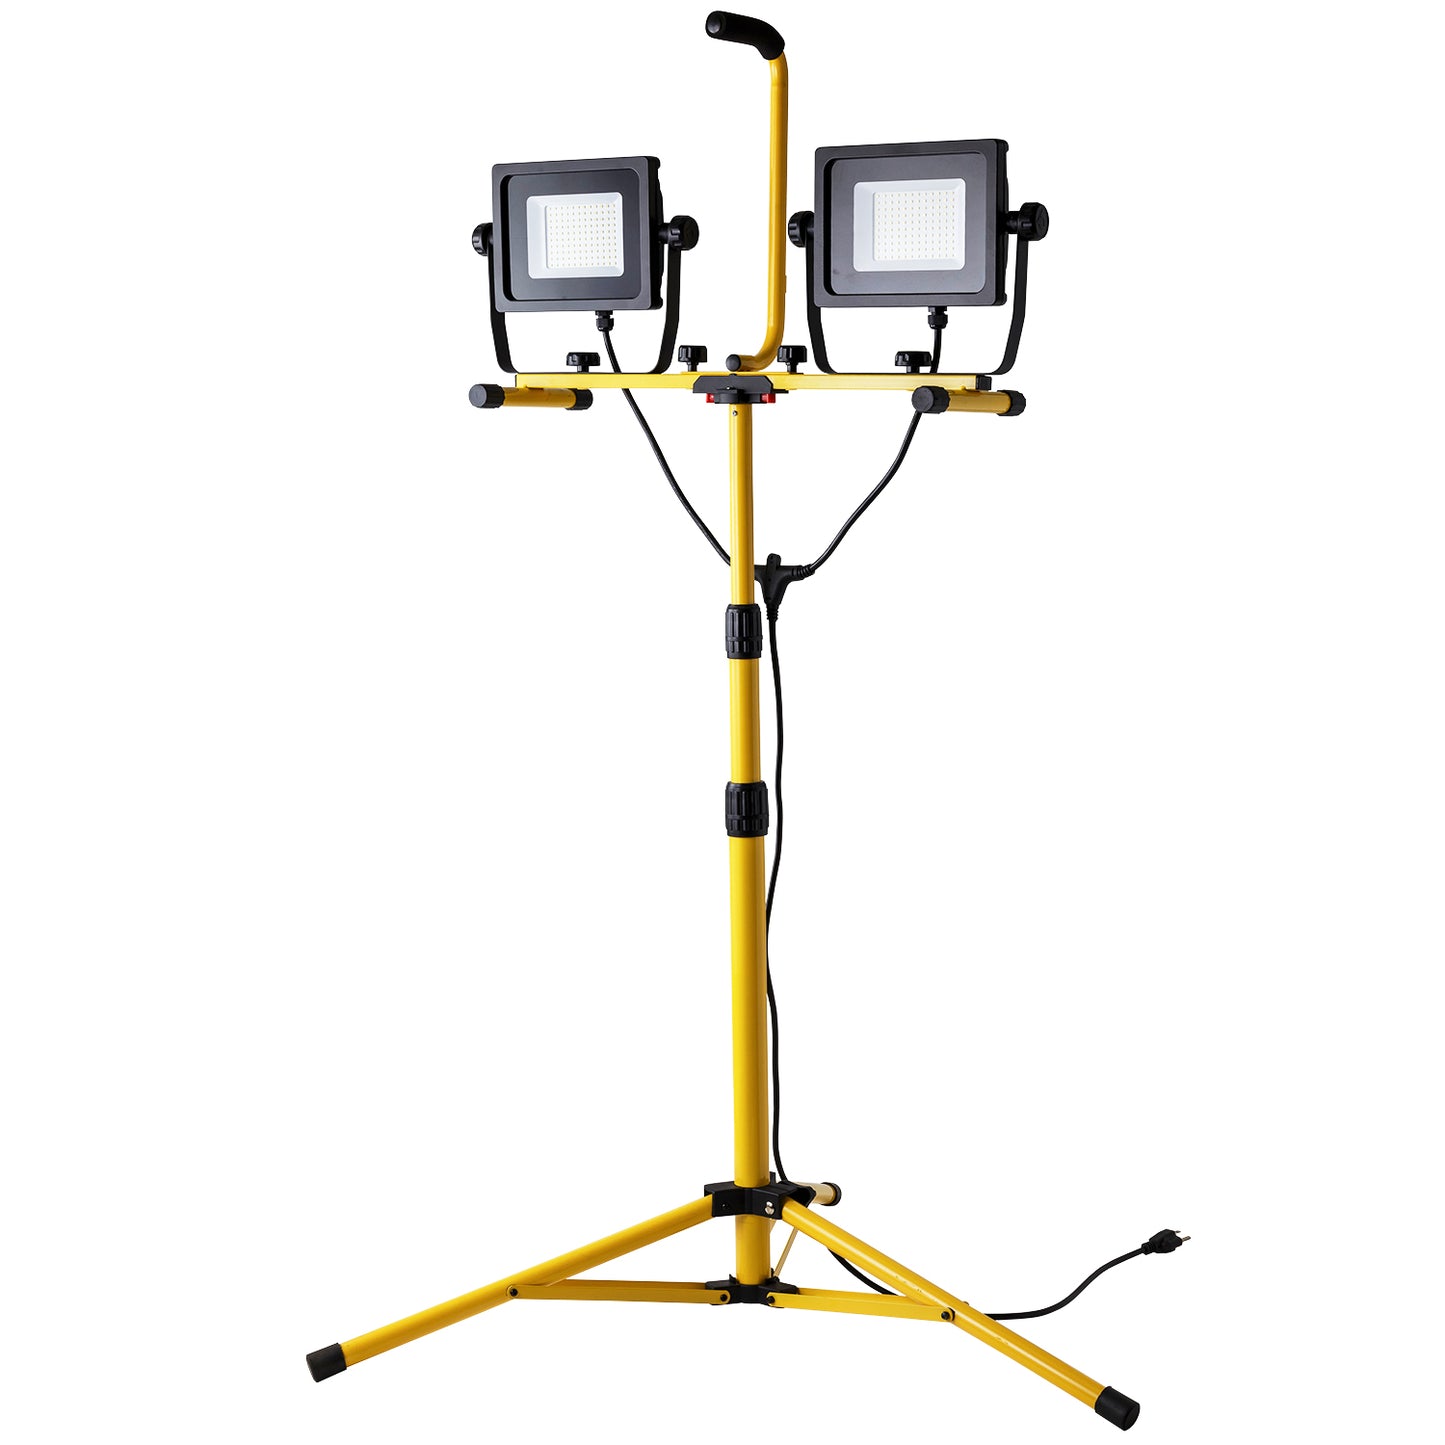 Sunlite 88178 LED Dual-Head Portable Construction Work Light with Tripod Stand, 144 Watts, 7000 Lumens, 6 Foot Cord, for Workshops, Garages, Attics, Basements, Job Sites, UL Listed, 40K - Cool White